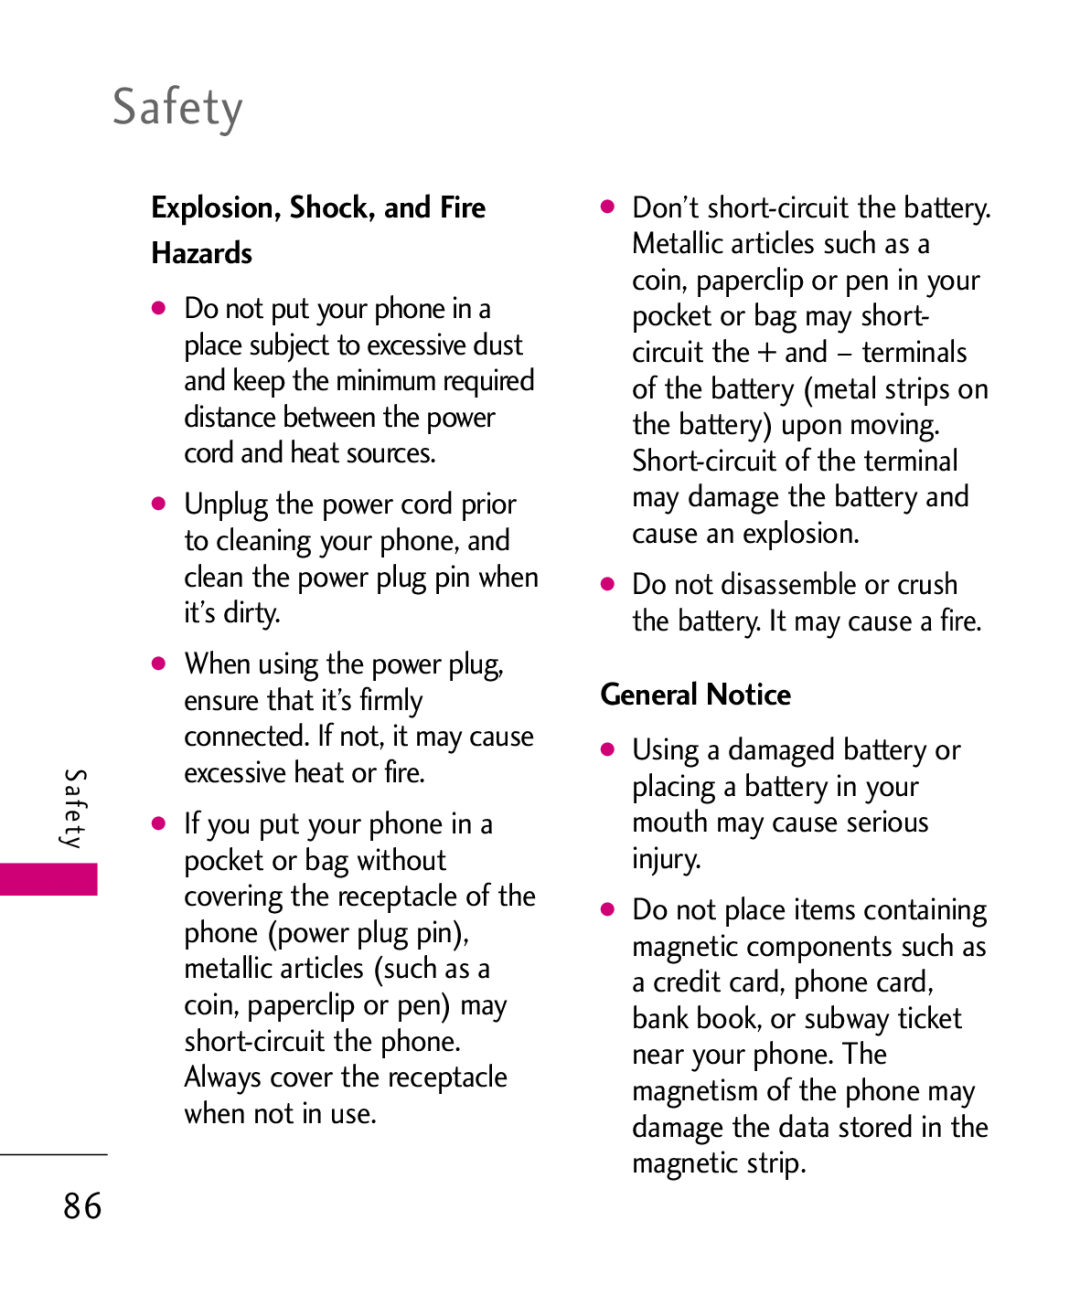 LG Electronics AX310 Explosion, Shock, and Fire Hazards, General Notice, Safety, metallic articles such as a, Sa fety 